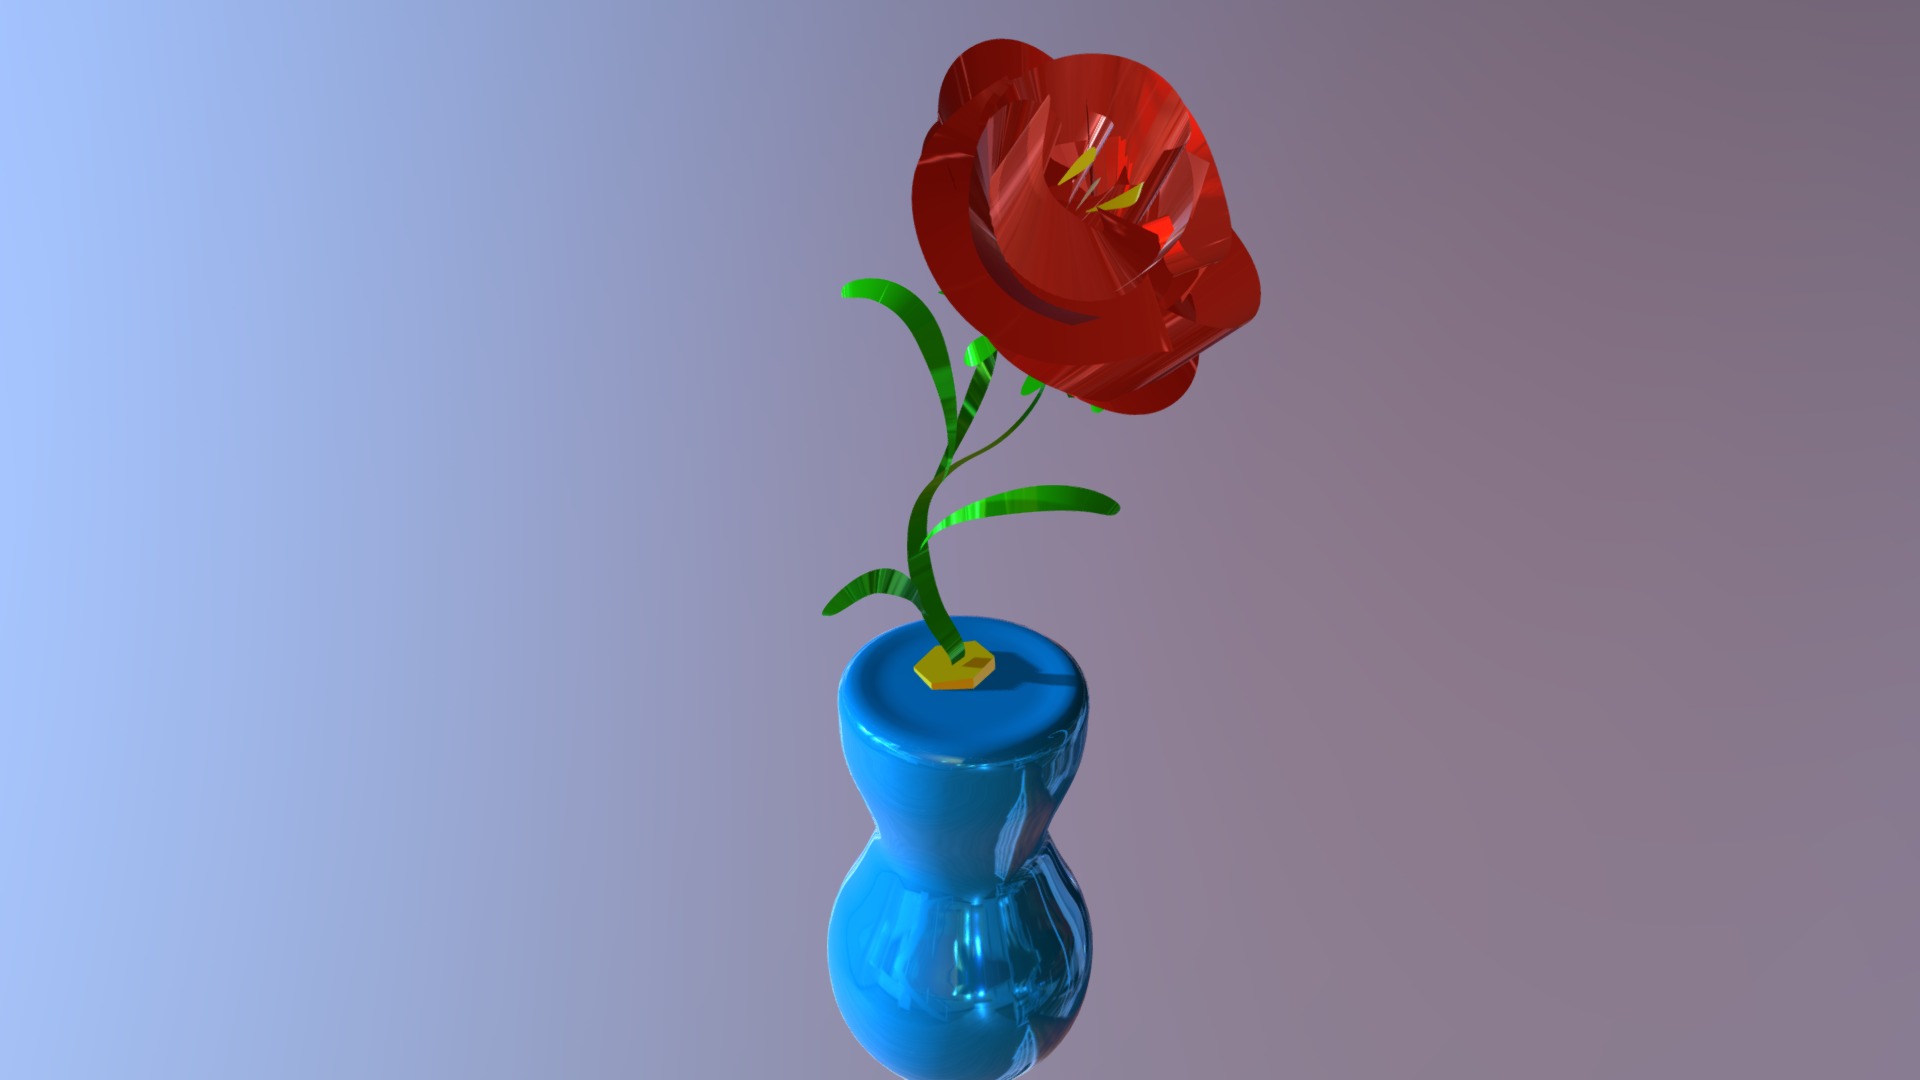 3D model Rose - This is a 3D model of the Rose. The 3D model is about a red flower in a blue vase.